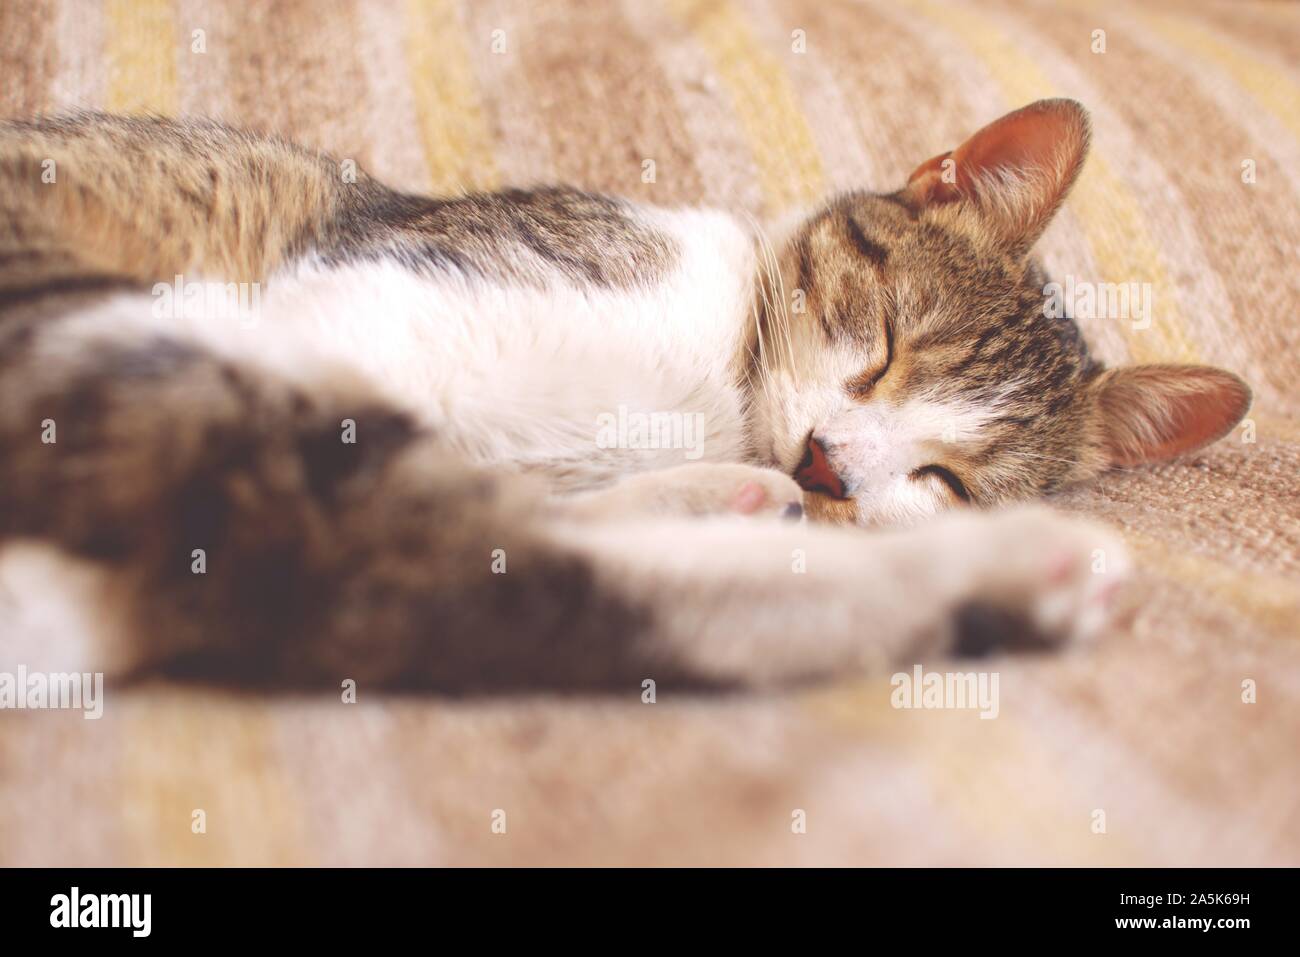 Tabby cat sleeping on bed. Worm's eye, low angle view. Stock Photo